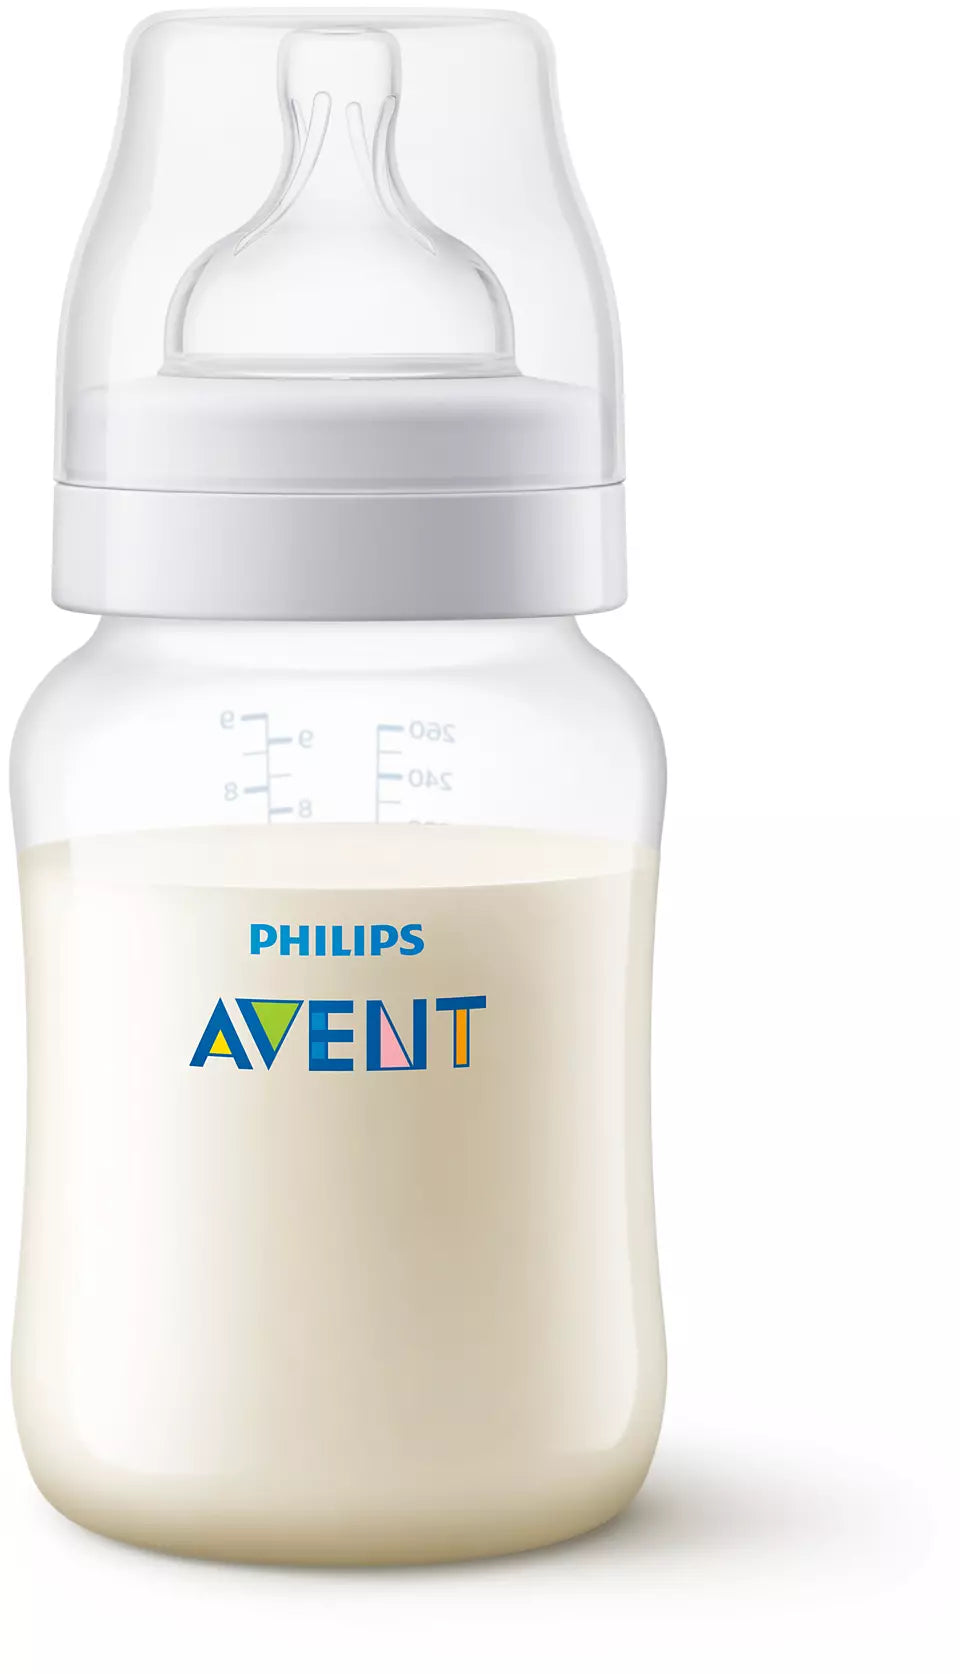 PHILIPS AVENT Pack Of 2 Anti-Colic Baby Bottle Set, Extra Soft Nipple, Easy To Hold, Little Baby, 260 ml - Clear